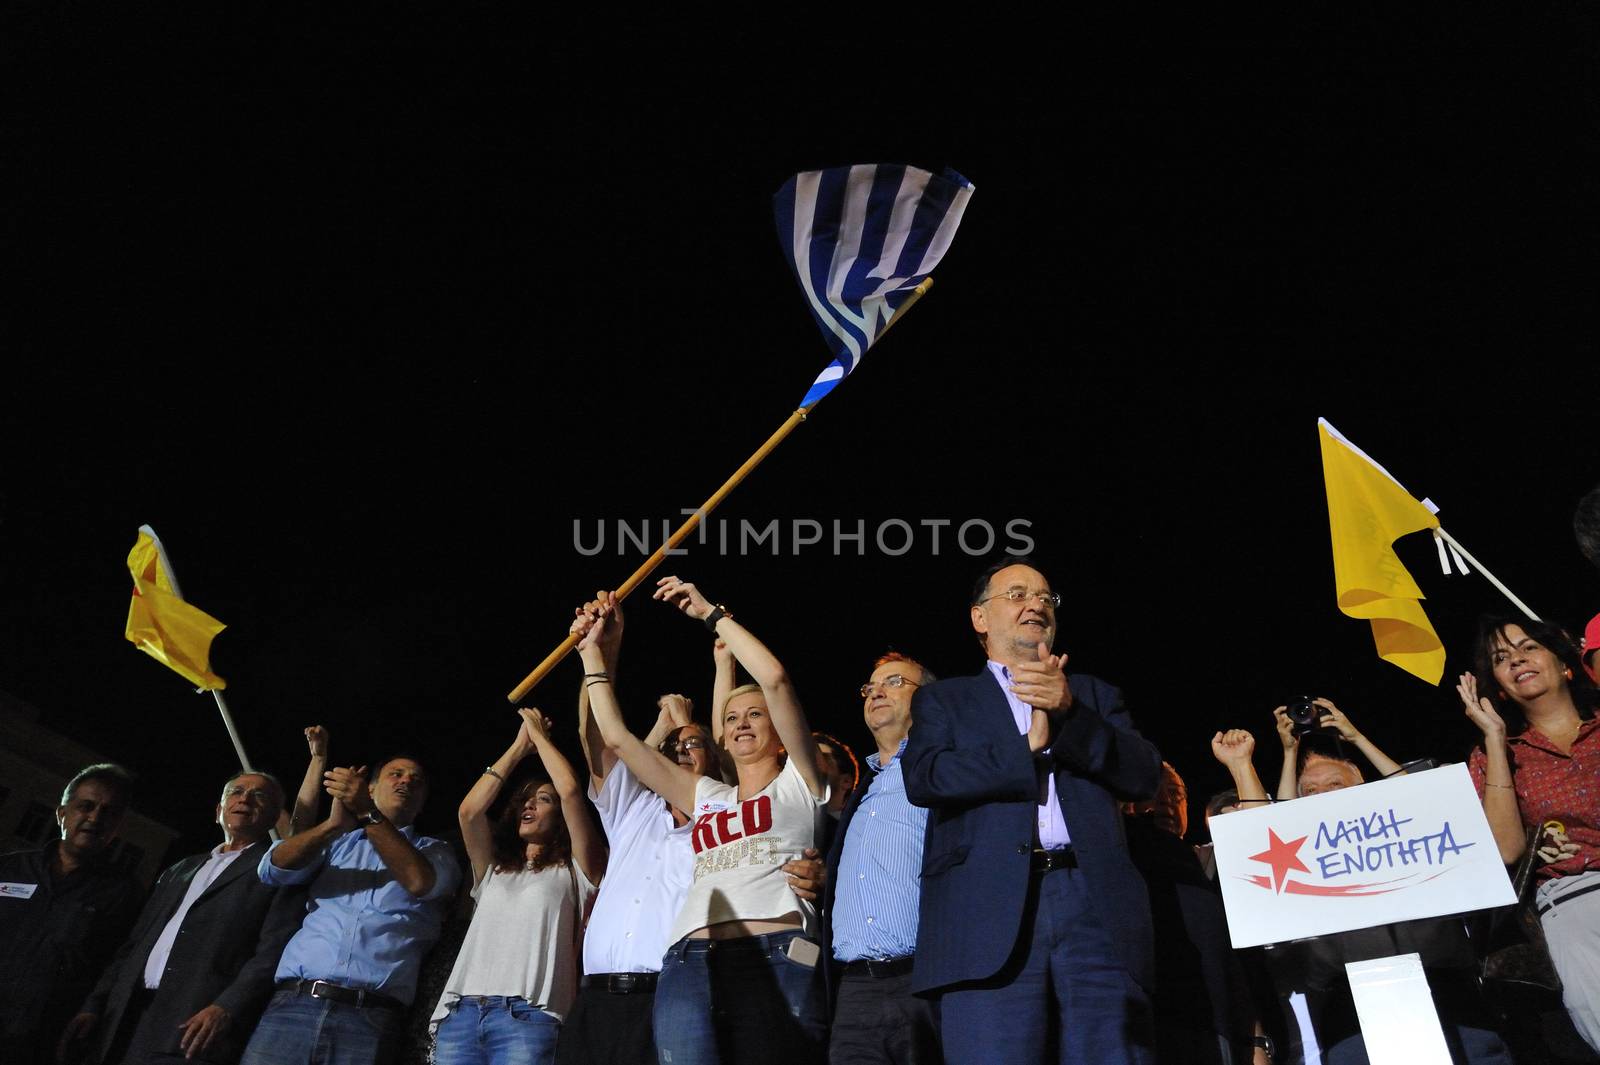 GREECE, Athens: Popular Unity party leader Panagiotis Lafazanis and other election candidates wave at supporters at the party's main pre-election rally in Athens on September 15, 2015. Greece's snap election takes place on September 20, with Syriza leader Alexis Tsipras and New Democracy's Evangelos Meimarakis the frontrunners.